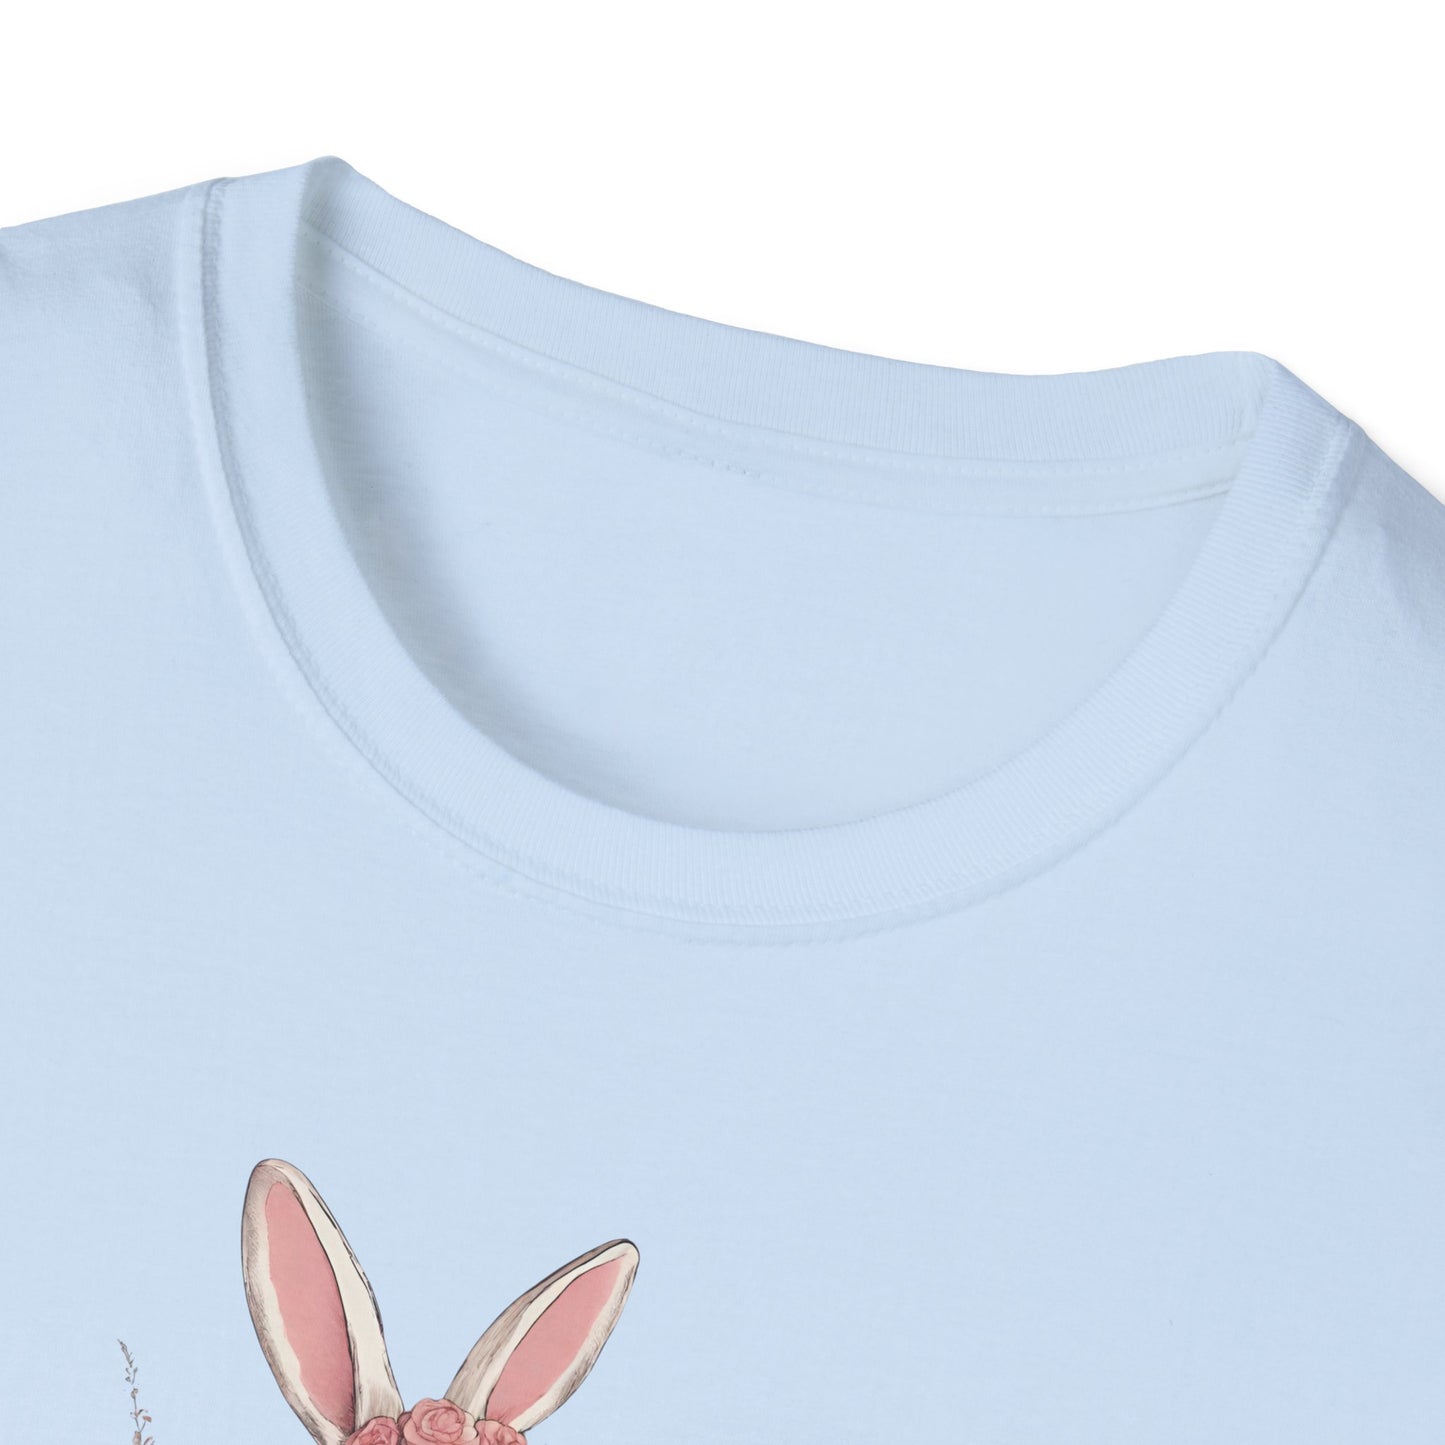 Cute Tshirt, Gift For Her, Cute Bunny, Trendy Crewneck, Coquette Tee, Bunny Cute Graphic, Vintage T-shirt